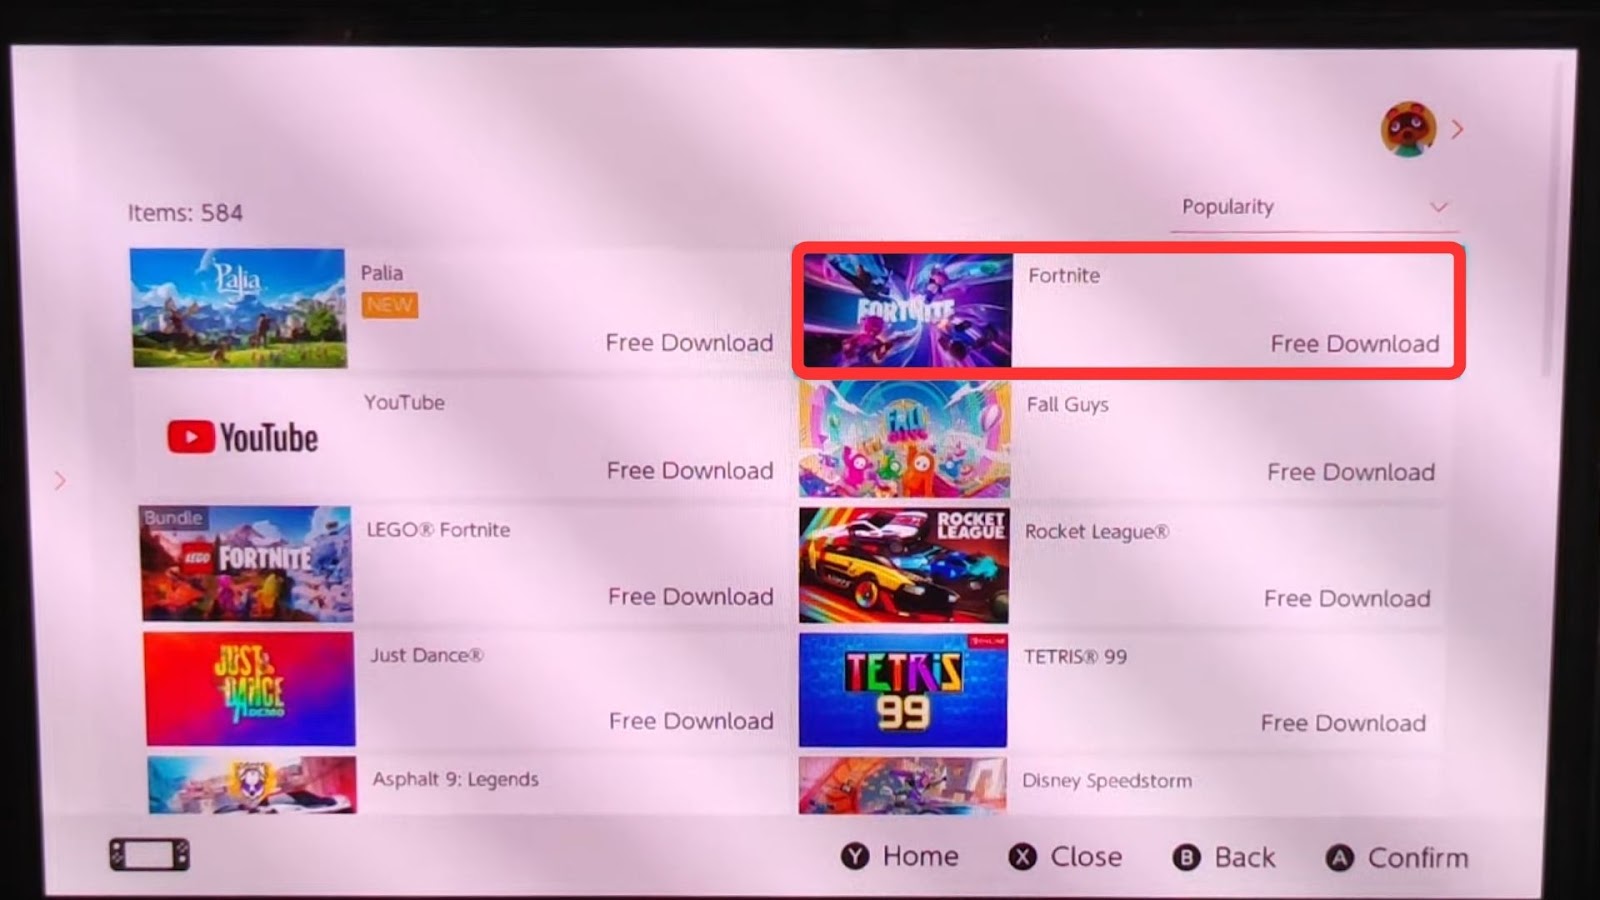 Free Downloading a Game on Nintendo Switch